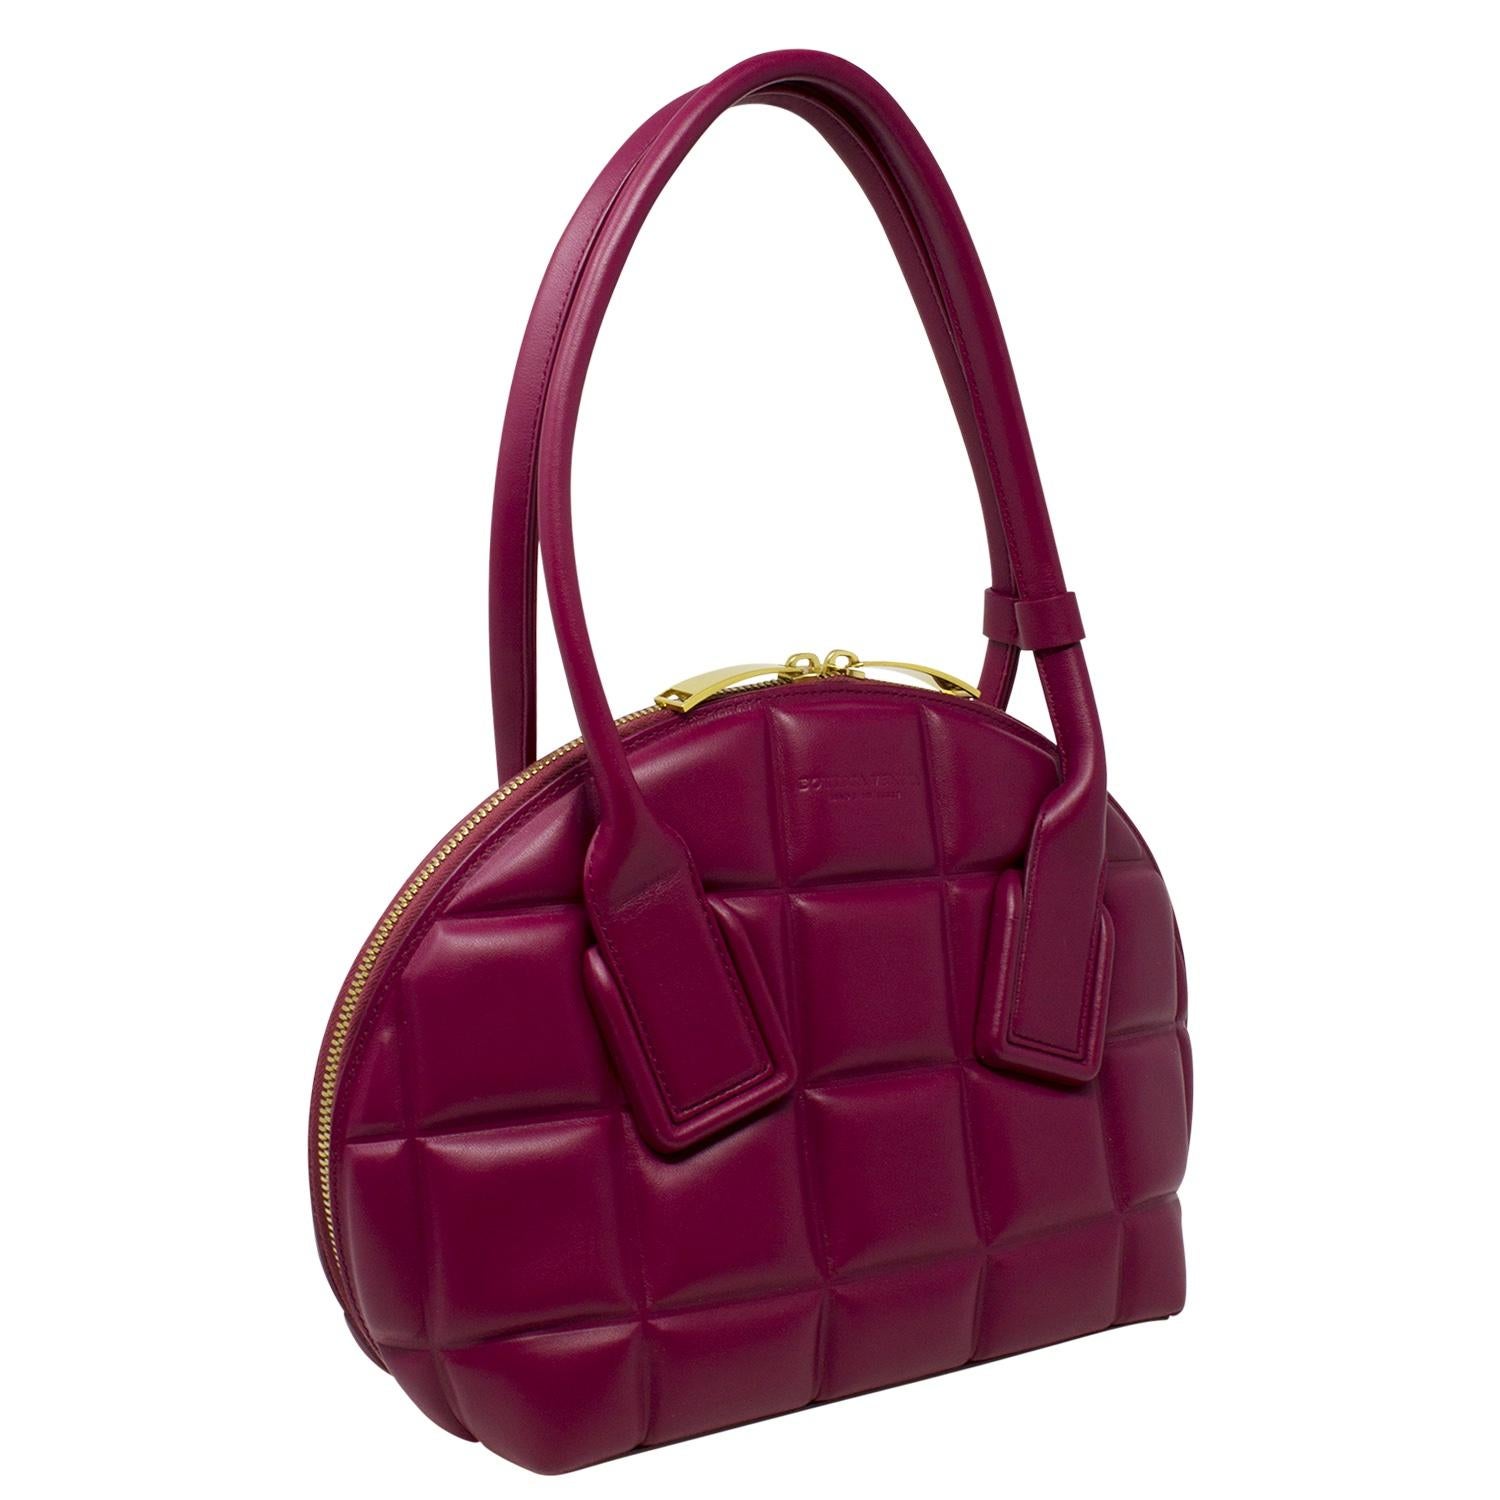 Rare and special Bottega Veneta top handle bag crafted in a beautiful maroon leather with dual rolled handles and a single adjustable shoulder strap. With gold-tone hardware, the zipper opens up to a tonal leather interior with the single interior